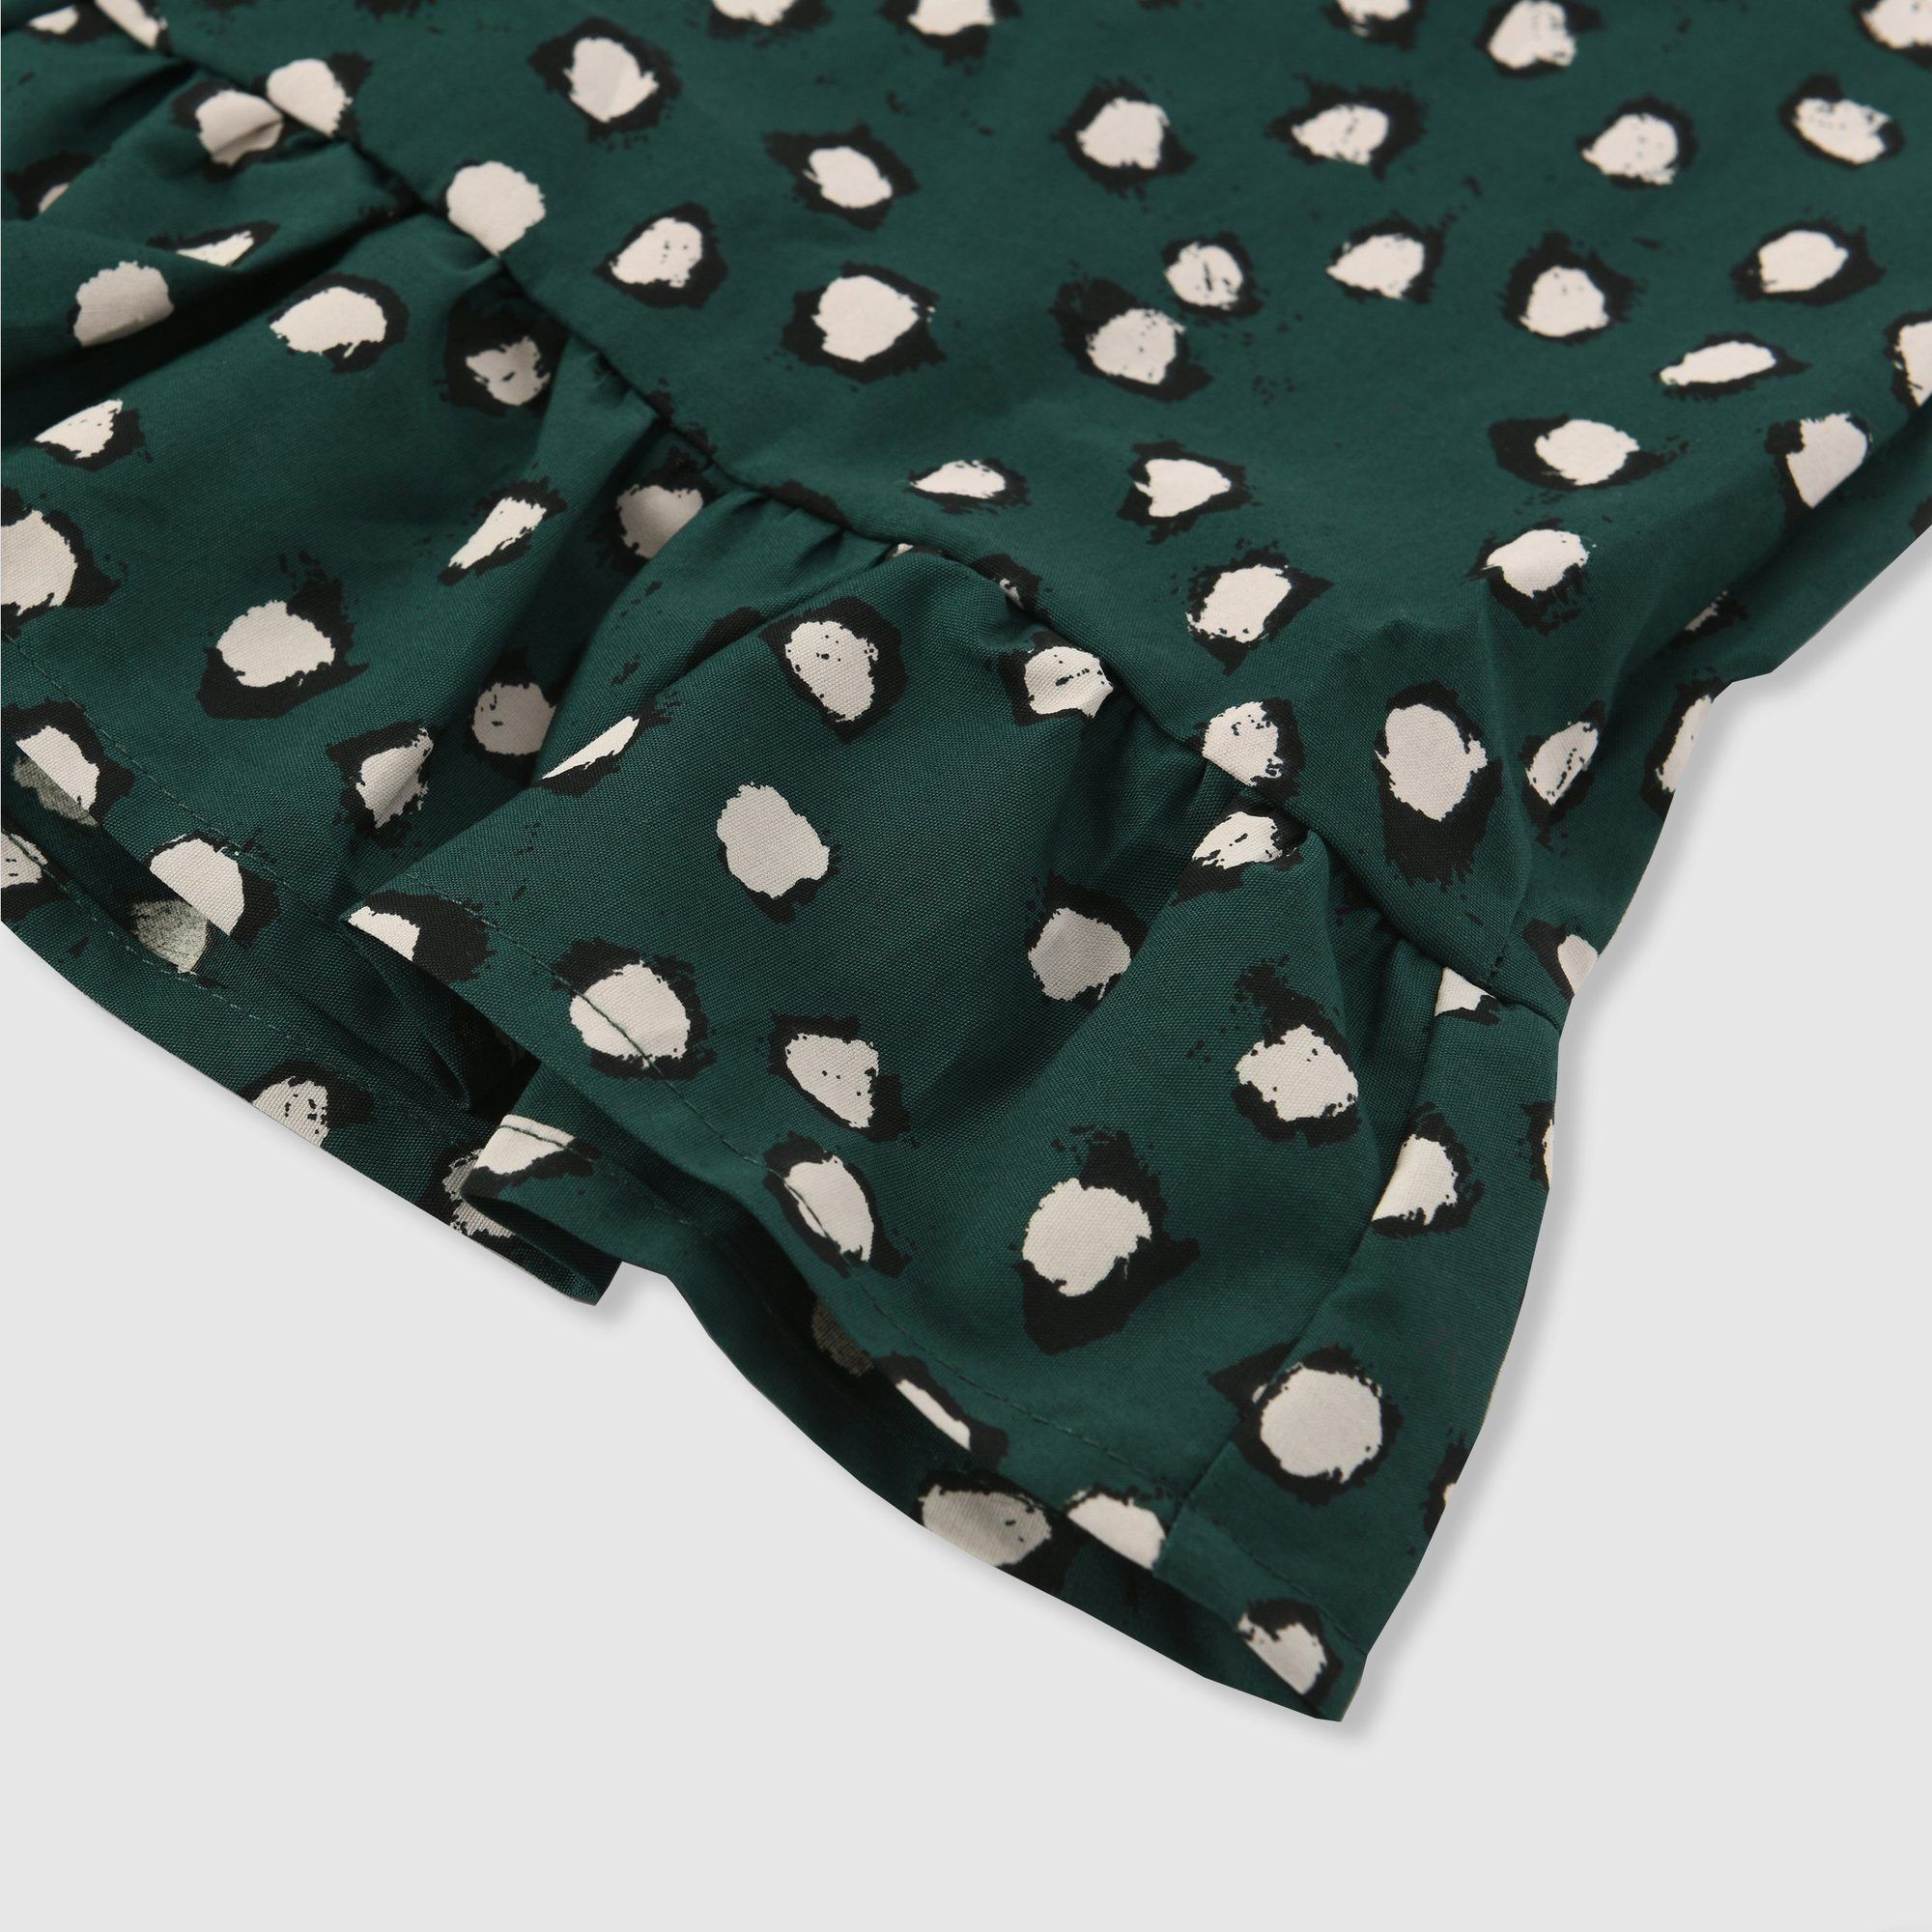 Simple lightweight 100% cotton pinafore dress in our bespoke painted dot print in green with black and white dots. Features a single button adjustable back closure and ruffle hem. 